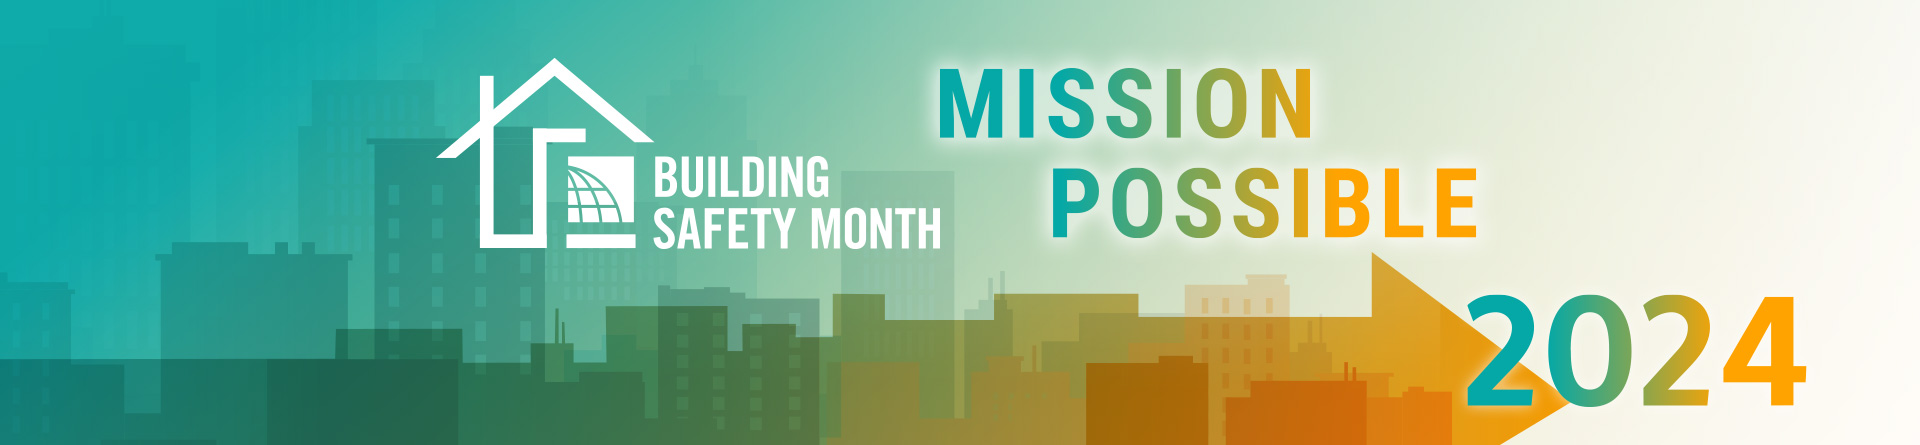 2024 Building Safety Month News